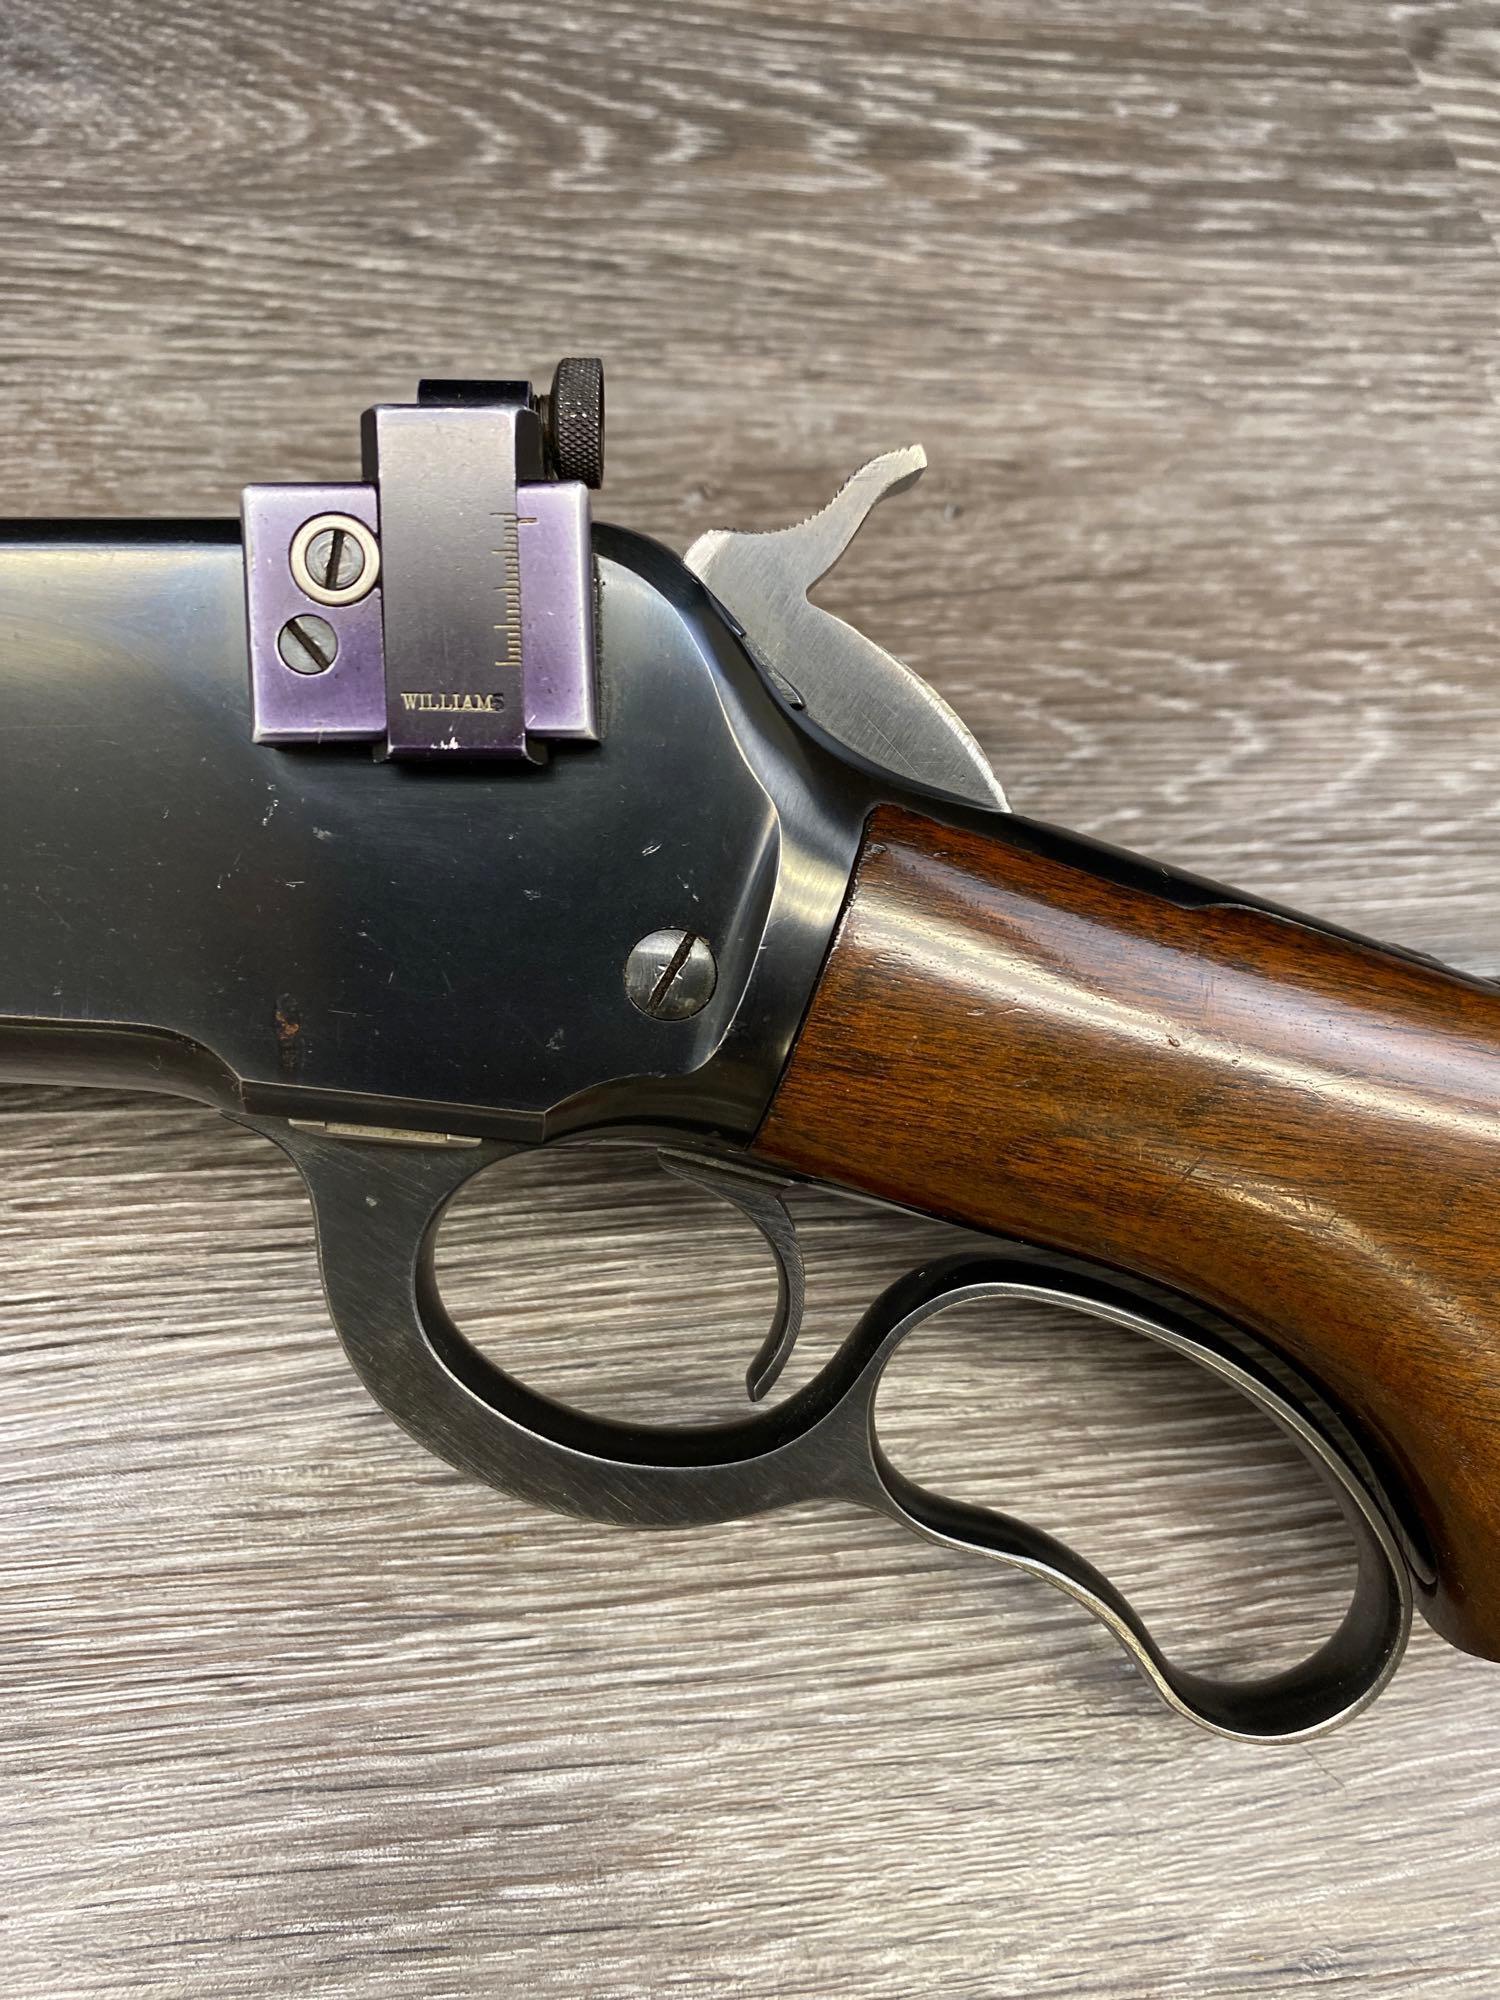 WINCHESTER MODEL 71 LEVER ACTION RIFLE .348 WCF CALIBER (CIRCA 1954).